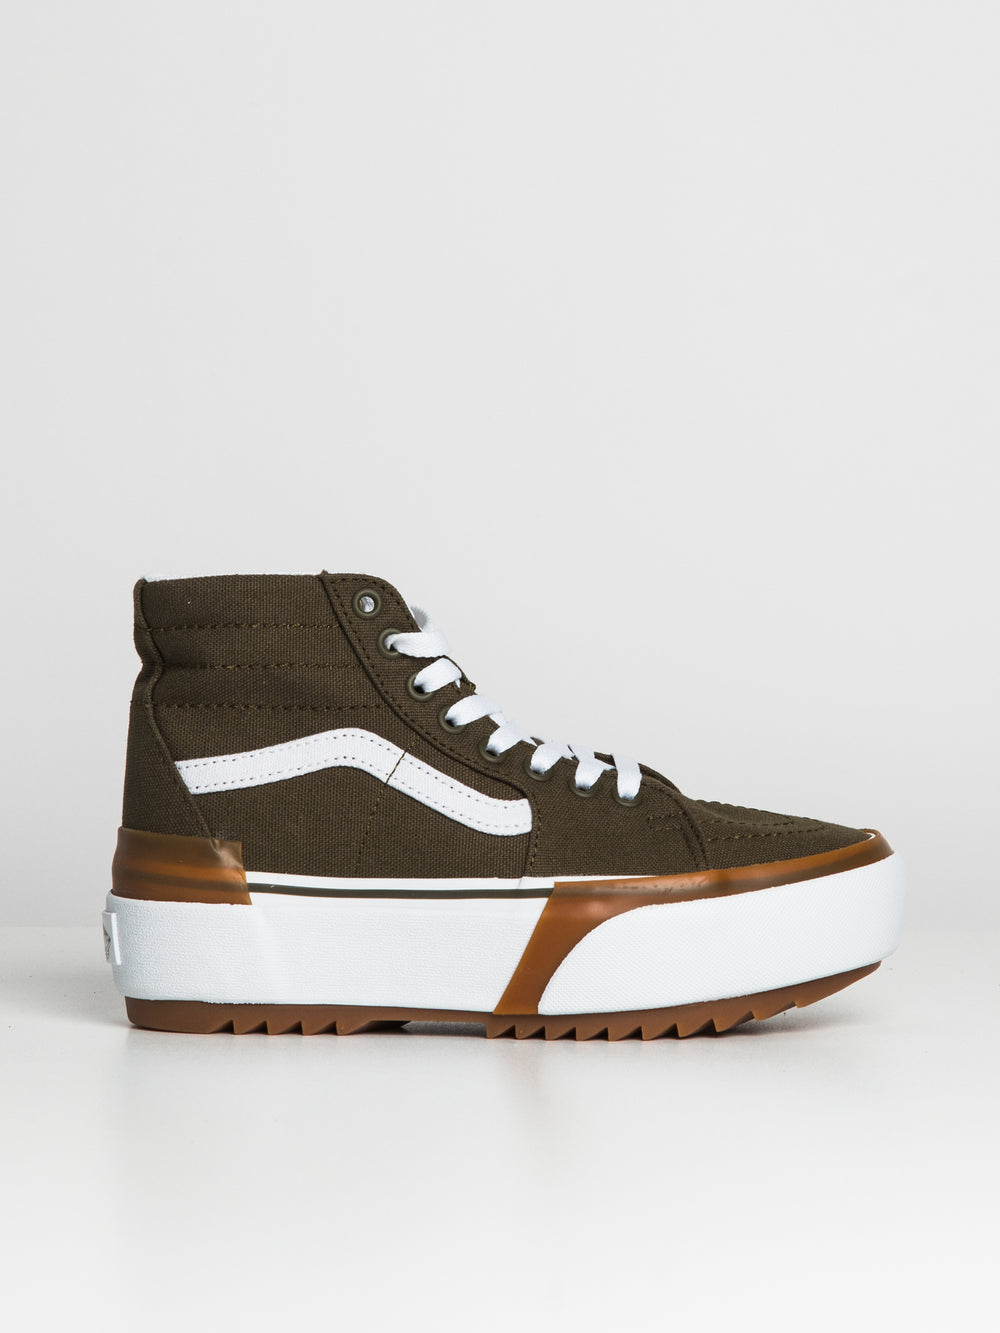 WOMENS VANS SK8 HI TAPERED STACKED CANVAS